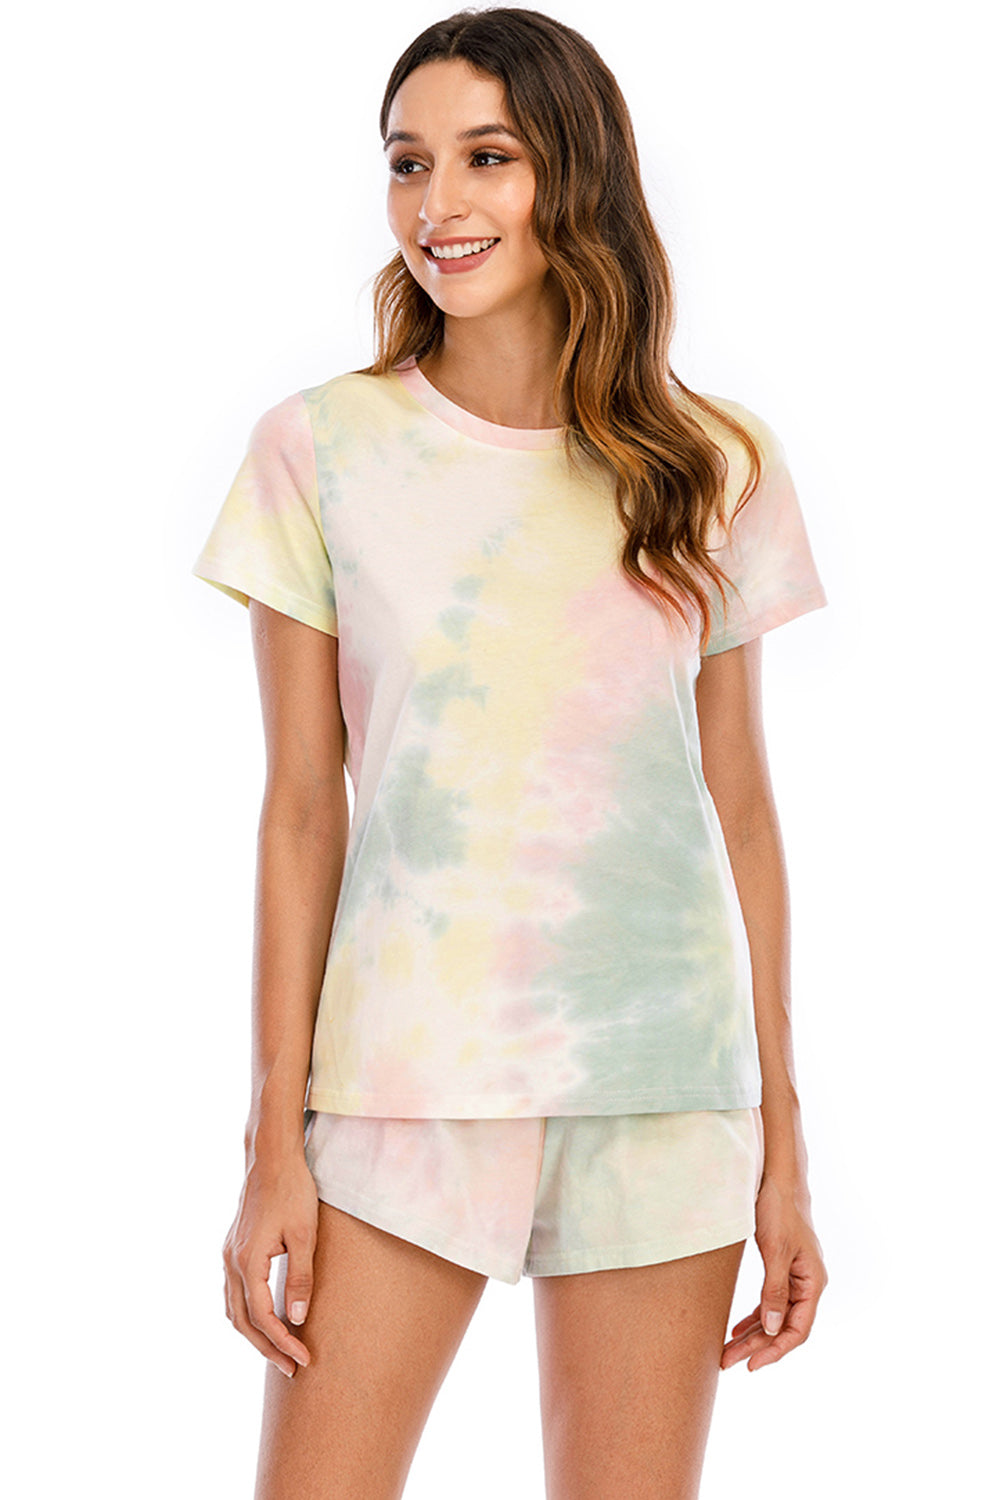 [H#Y] Tie-Dye Round Neck Short Sleeve Top and Shorts Lounge Set